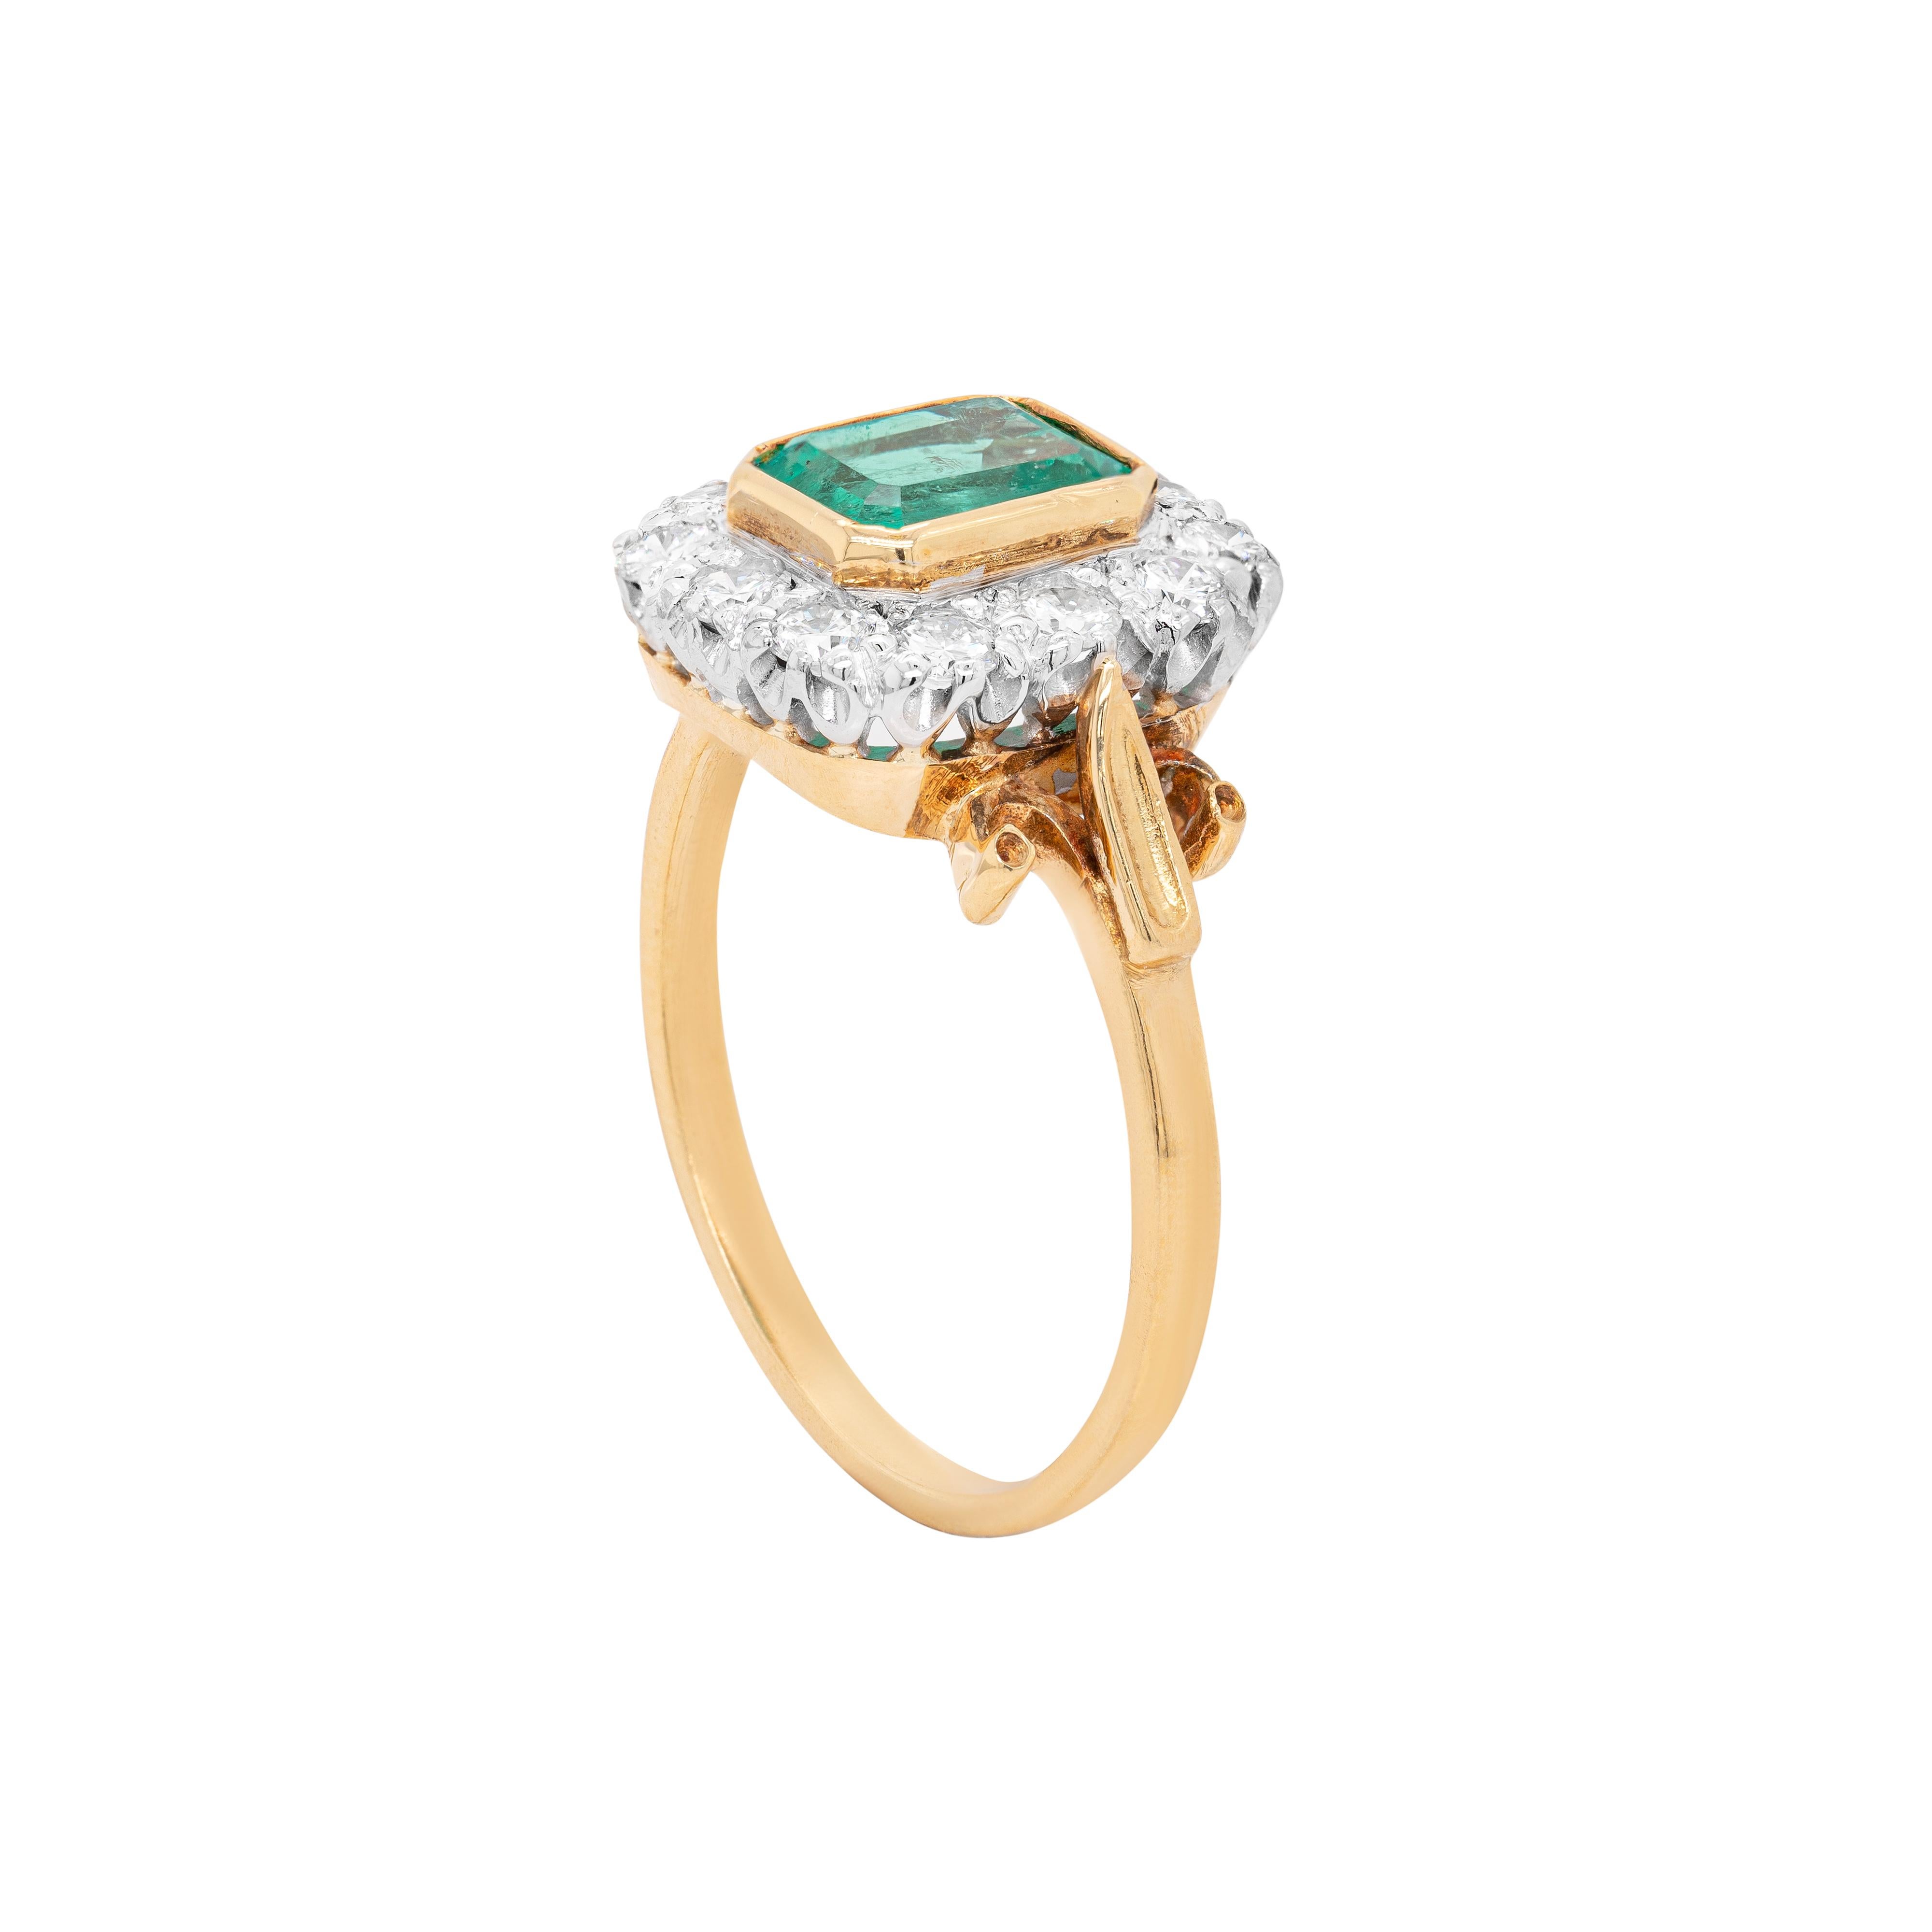 This gorgeous ring features a 1.16 carat emerald in the centre, rubover set in 18 carat yellow gold. The green gemstone is beautifully surrounded by 12 fine quality round brilliant cut diamonds totalling 0.52ct, all mounted in contrasting 18 carat